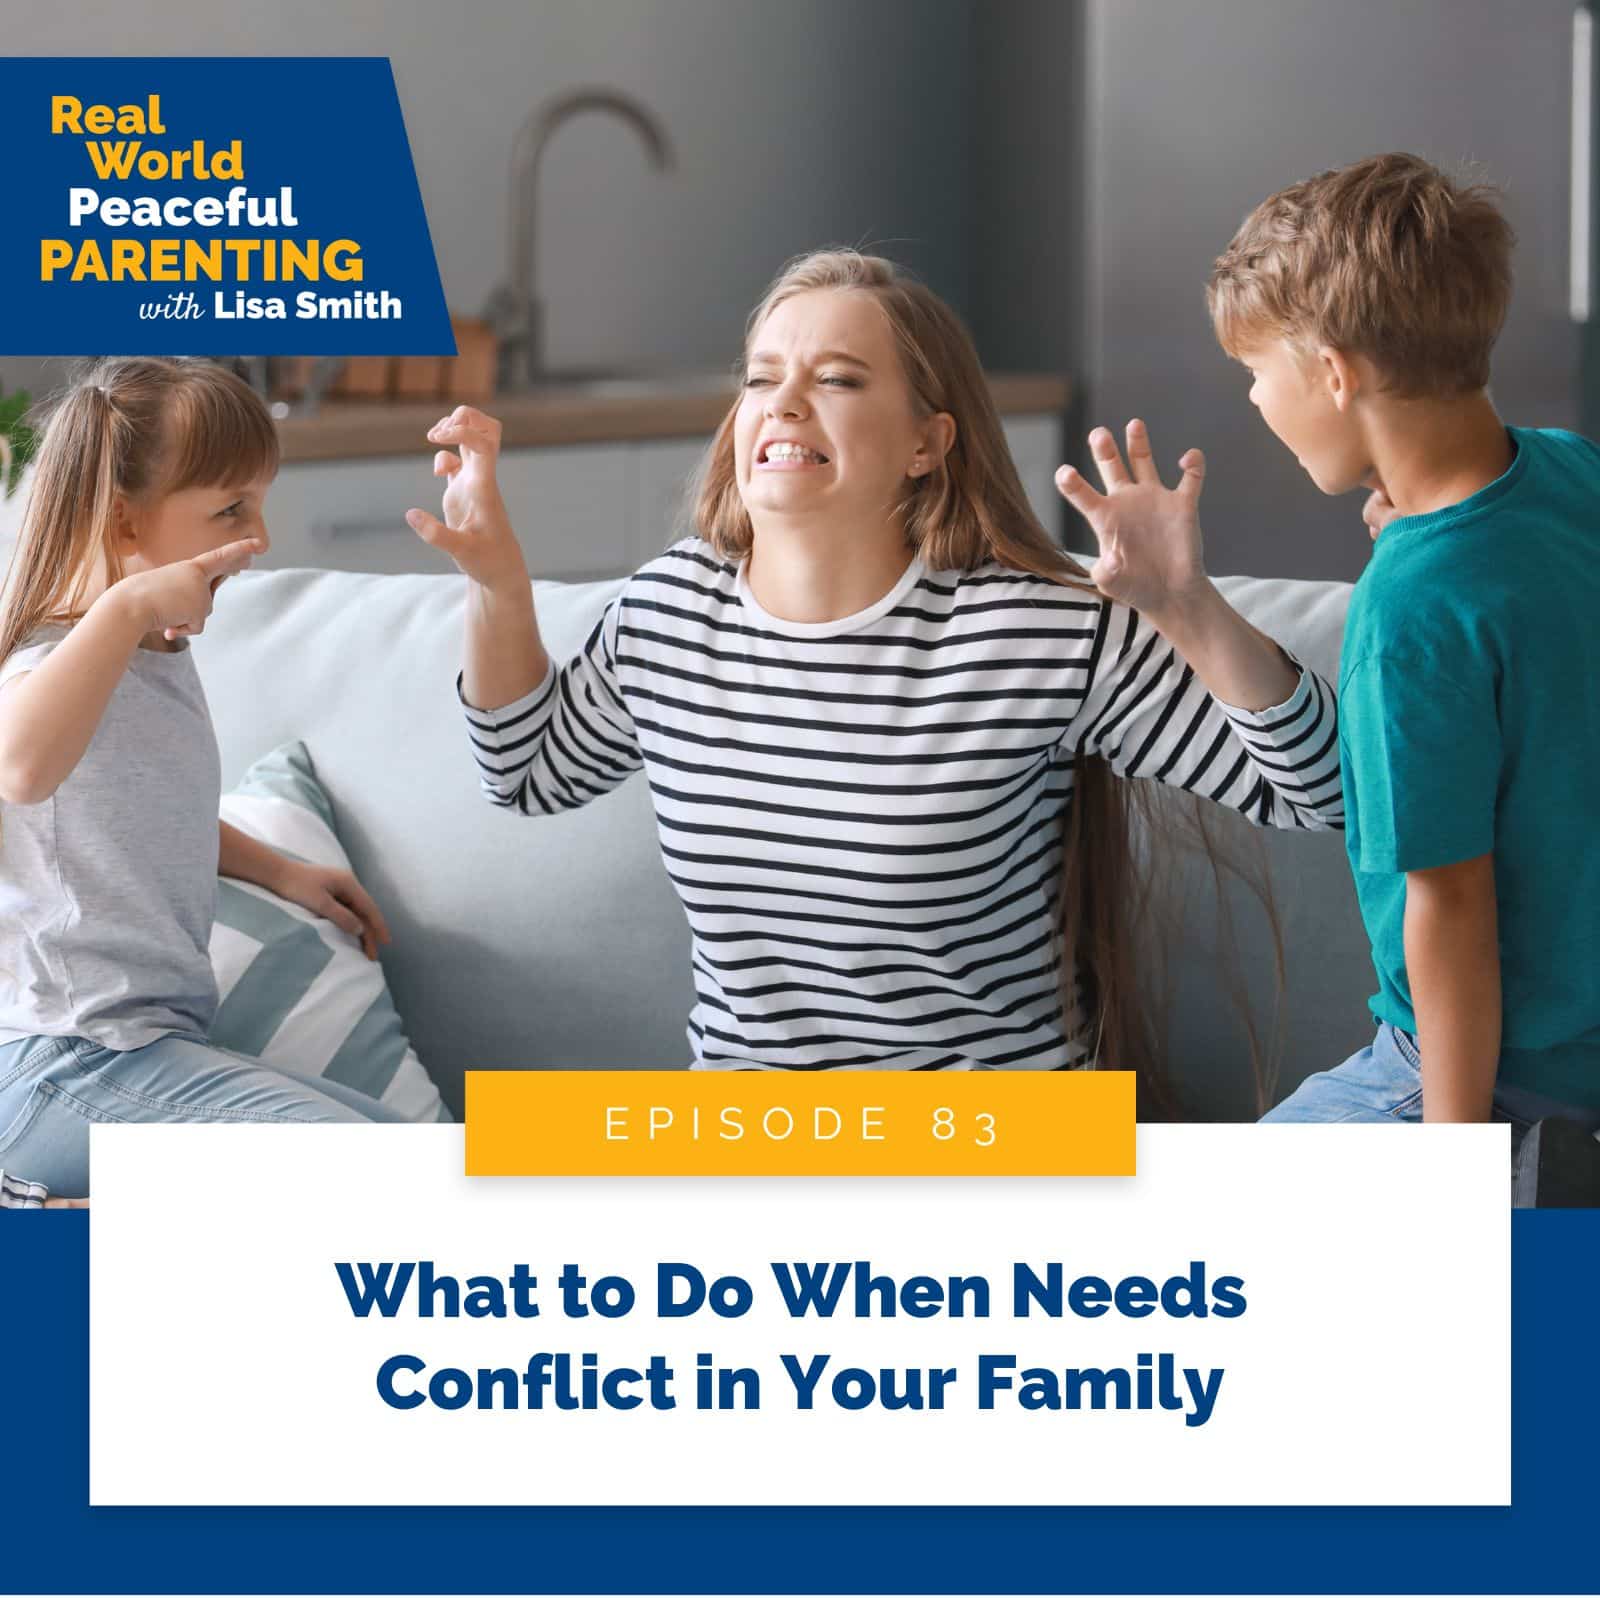 Real World Peaceful Parenting | What to Do When Needs Conflict in Your Family